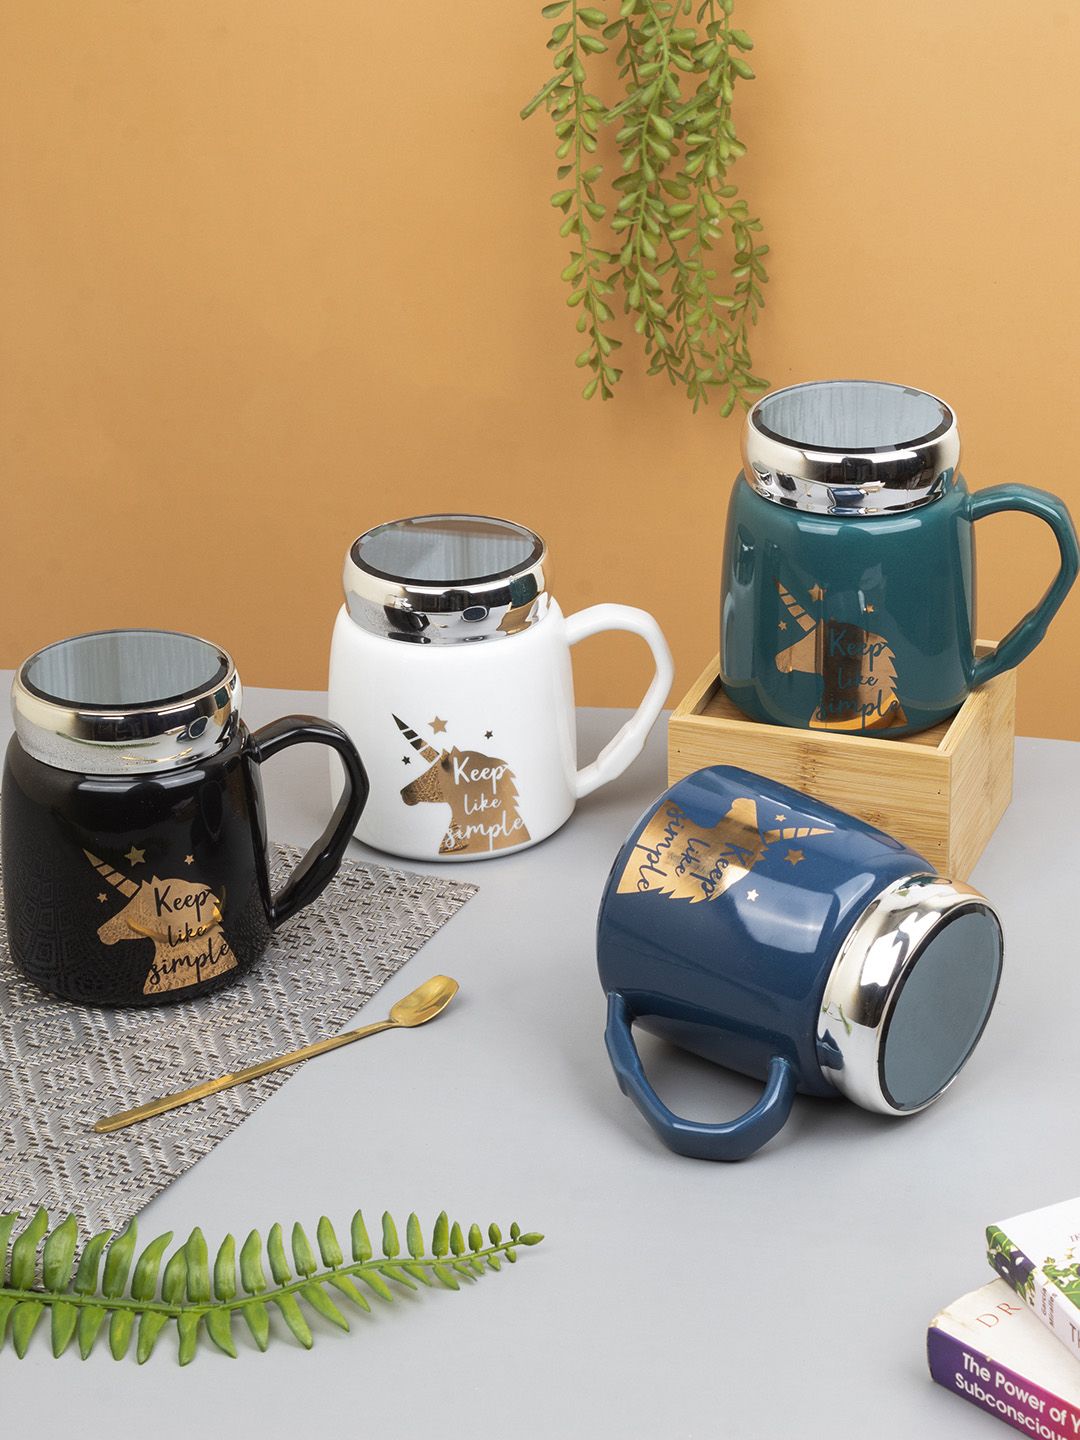 MARKET99 Assorted Printed Ceramic Glossy Coffee Mug With Lid Price in India